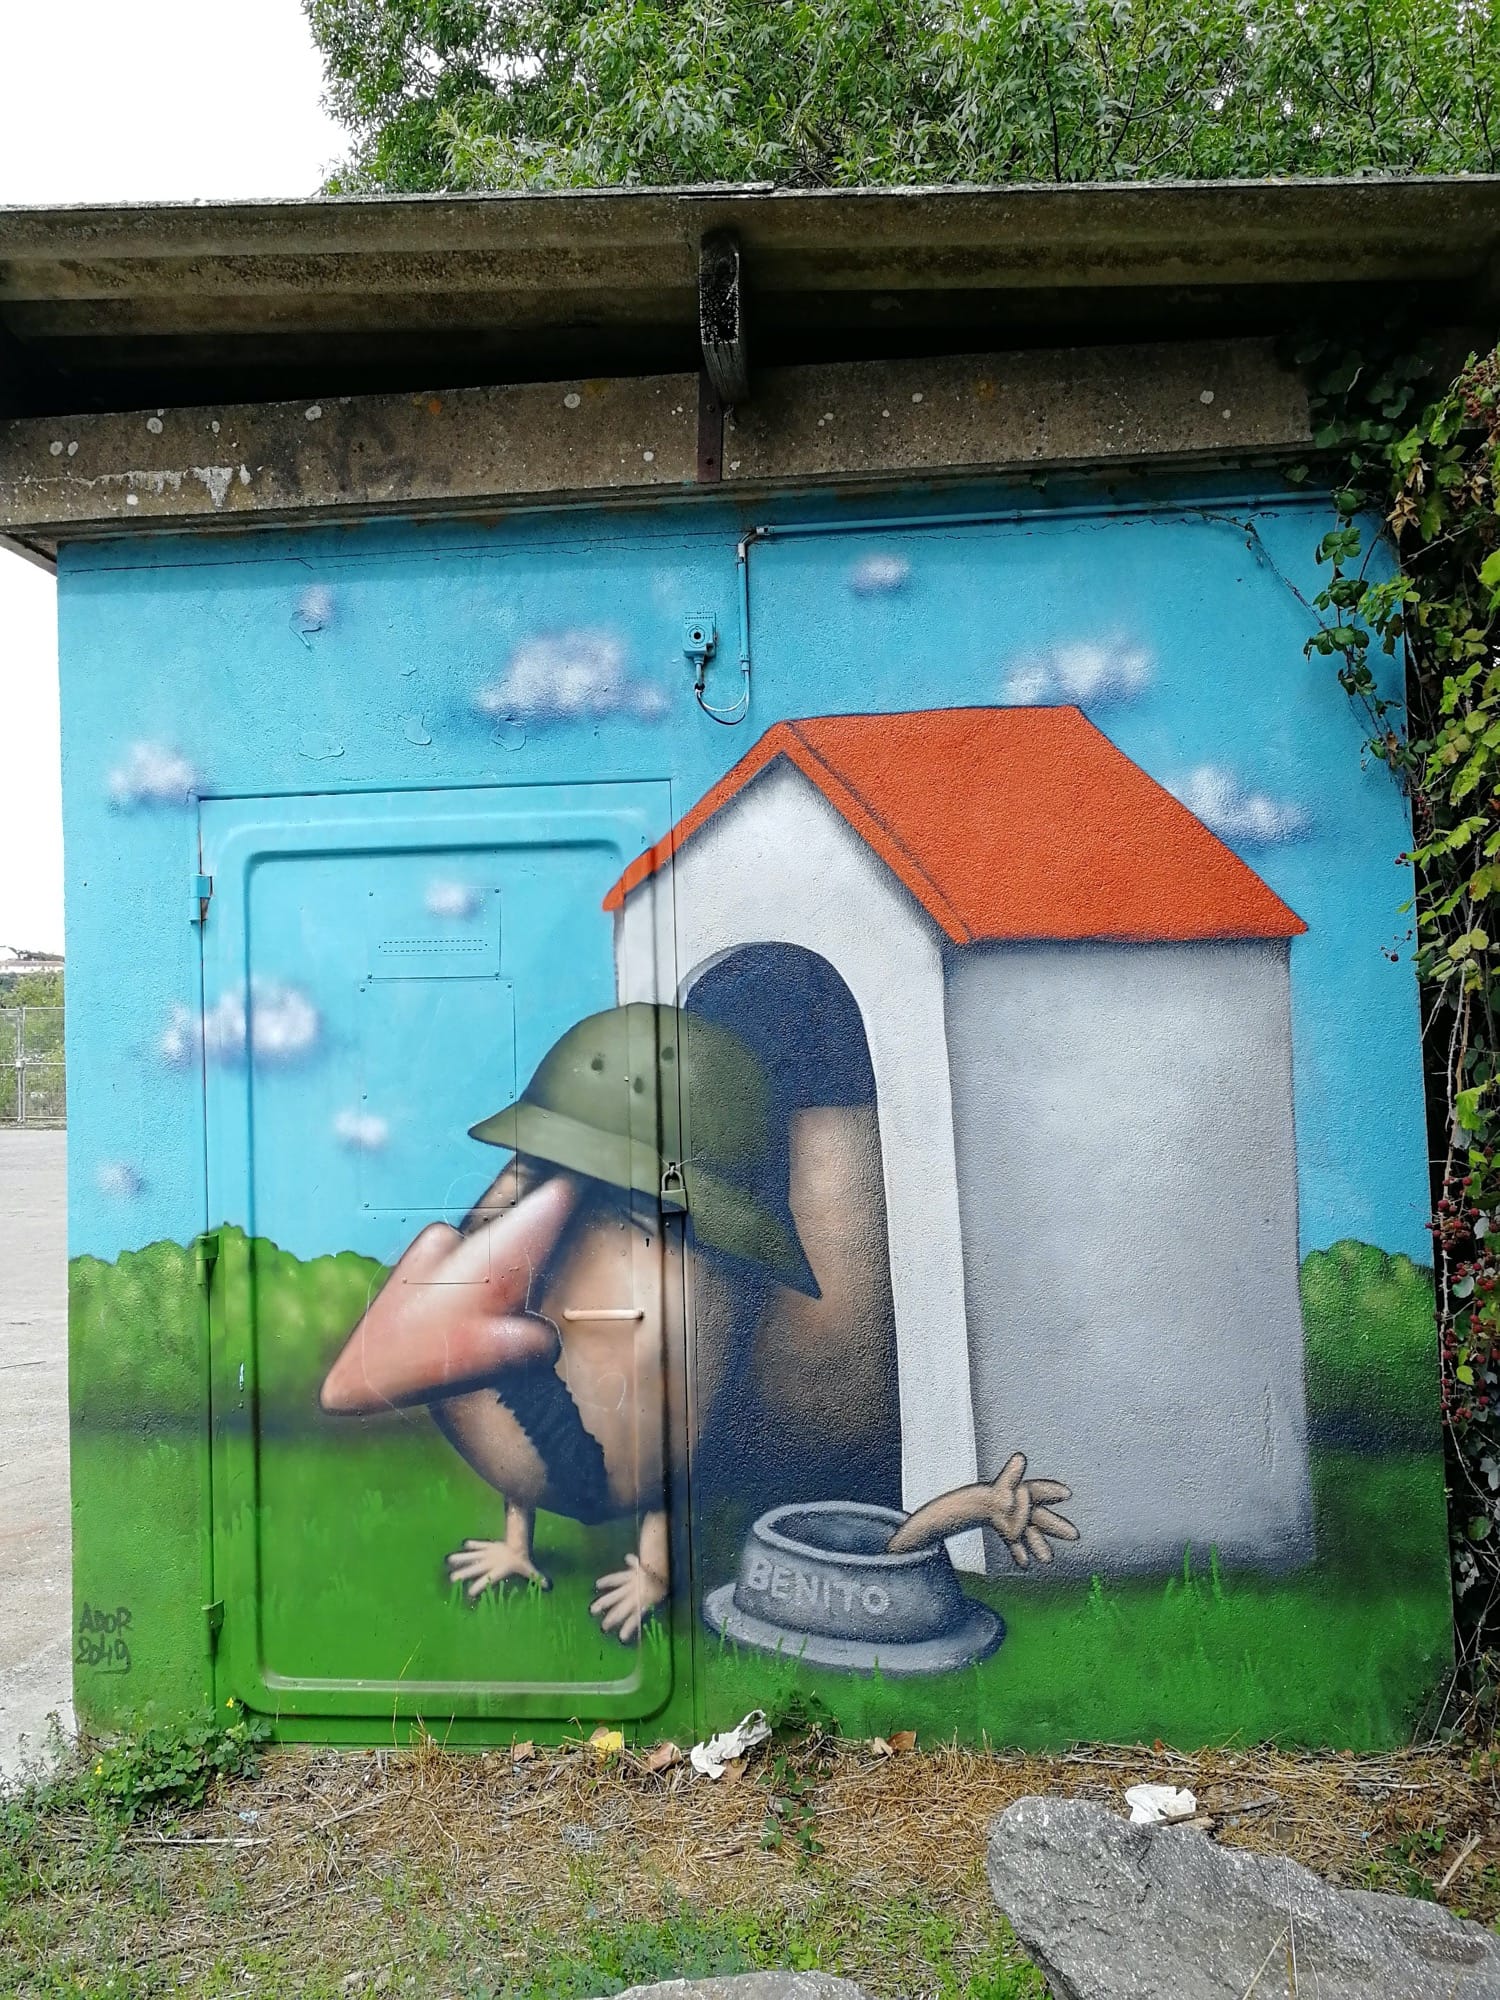 Graffiti 3005  by the artist Ador captured by Rabot in Rezé France